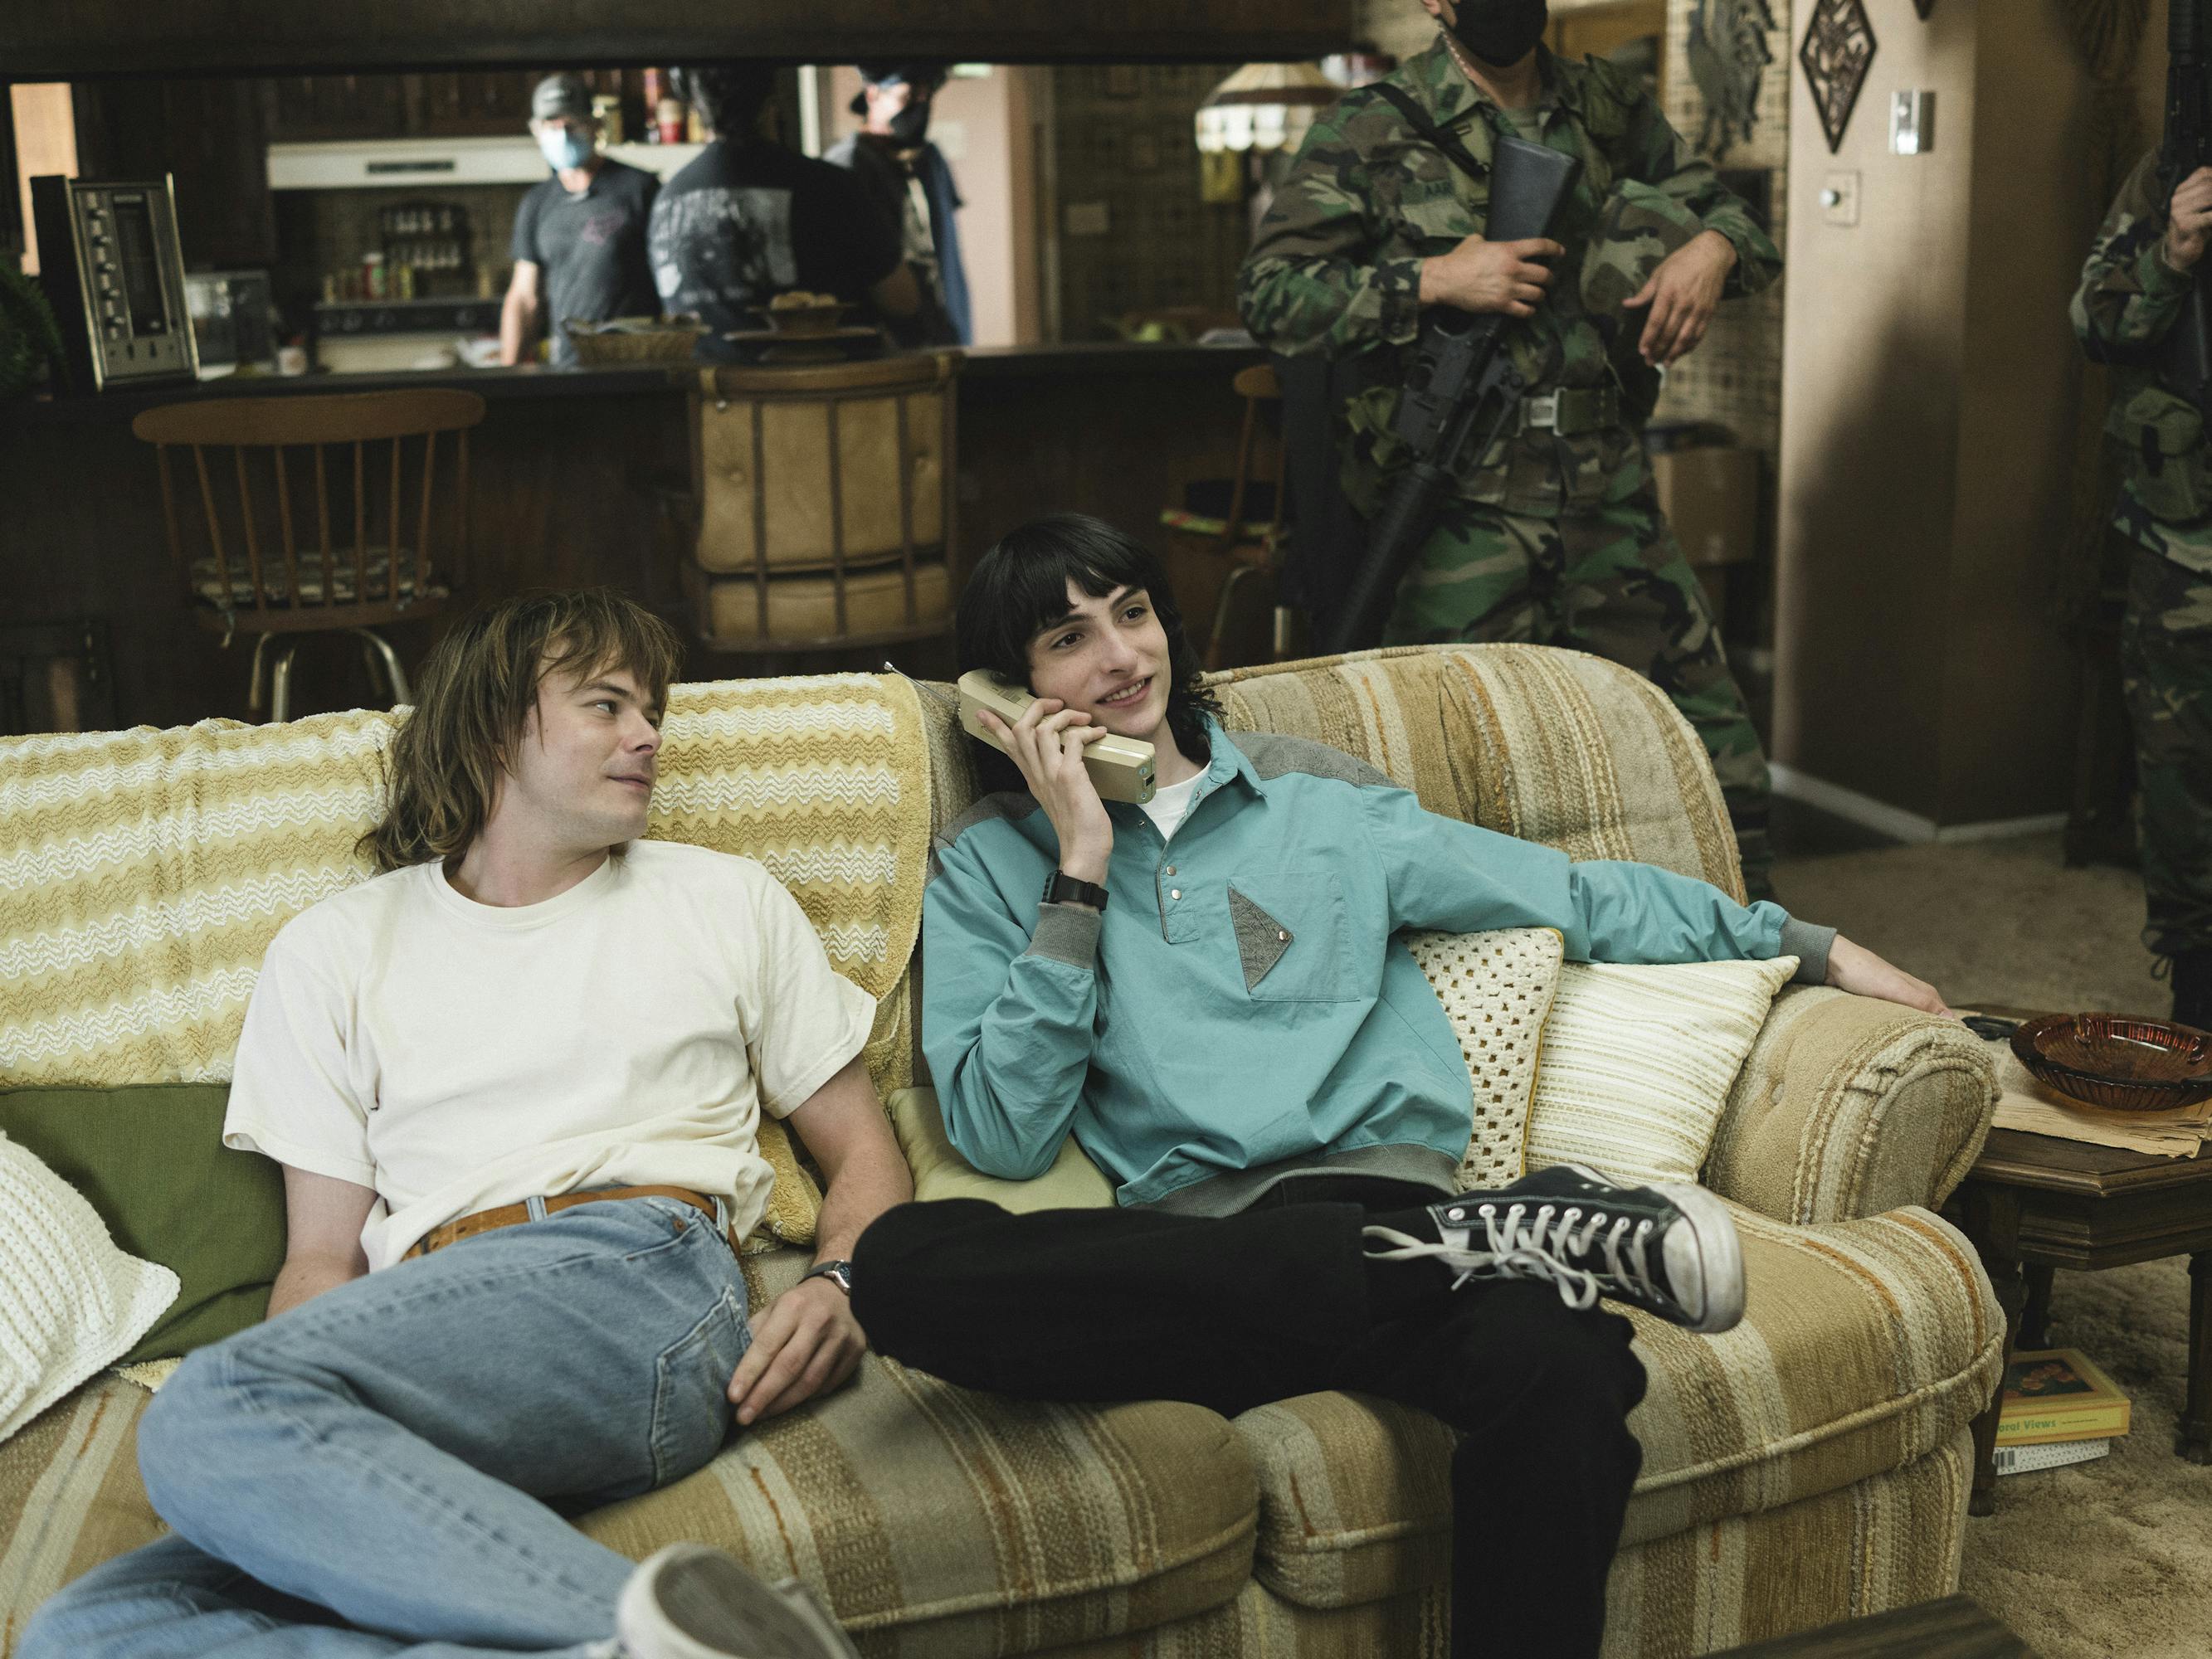 Jonathan Byers (Charlie Heaton) and Mike Wheeler (Finn Wolfhard) sit on a yellow striped couch.